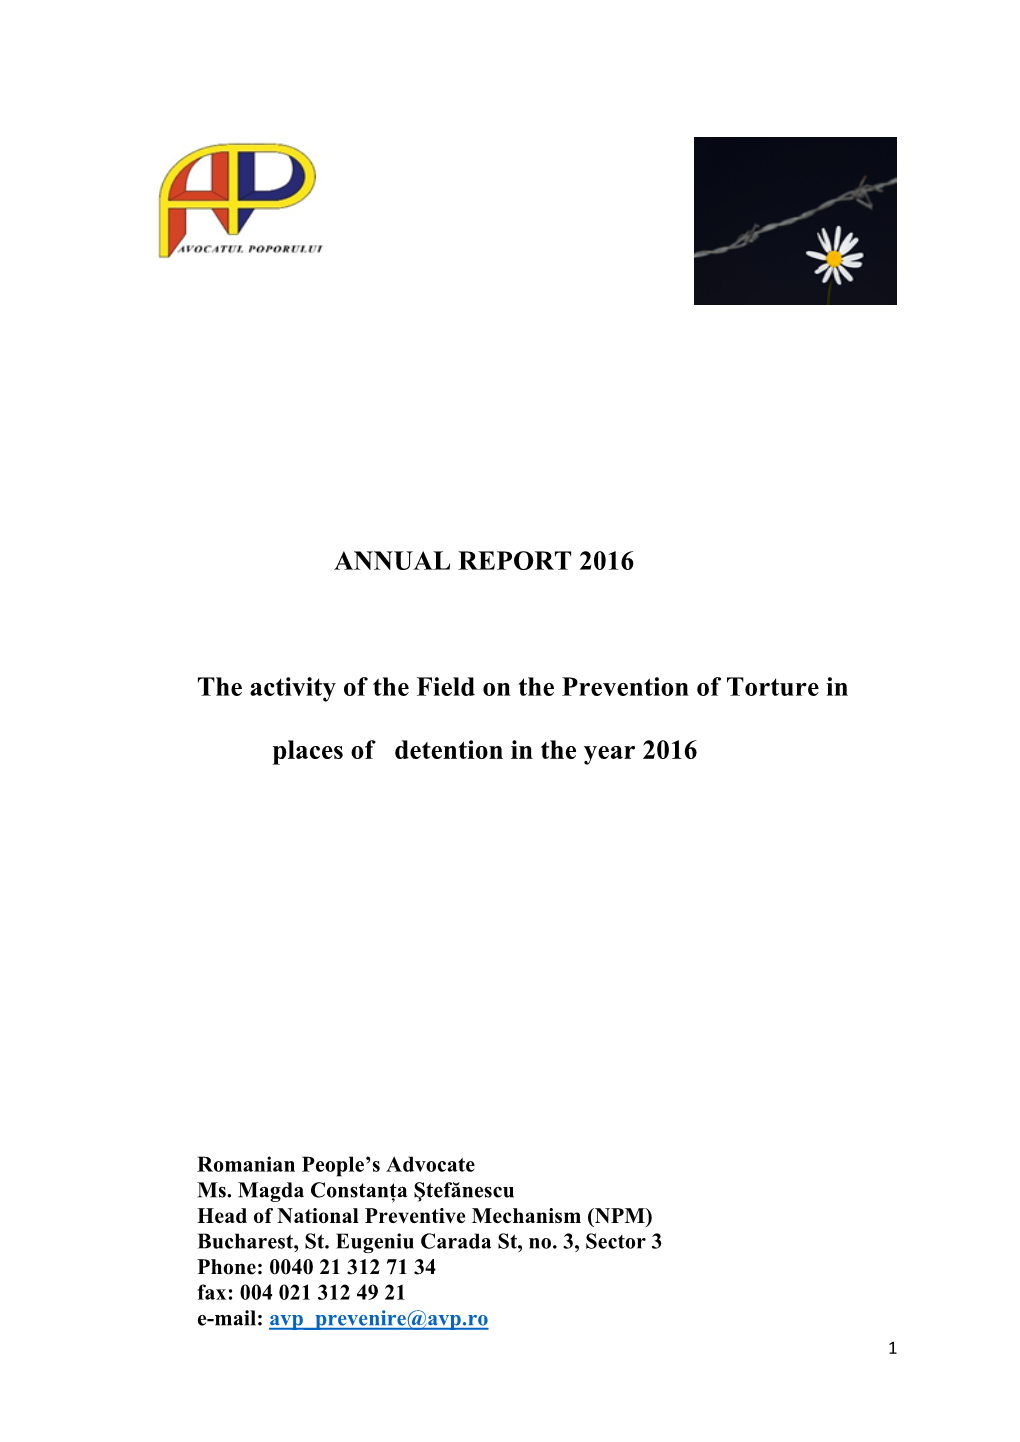 ANNUAL REPORT 2016 the Activity of the Field on the Prevention Of